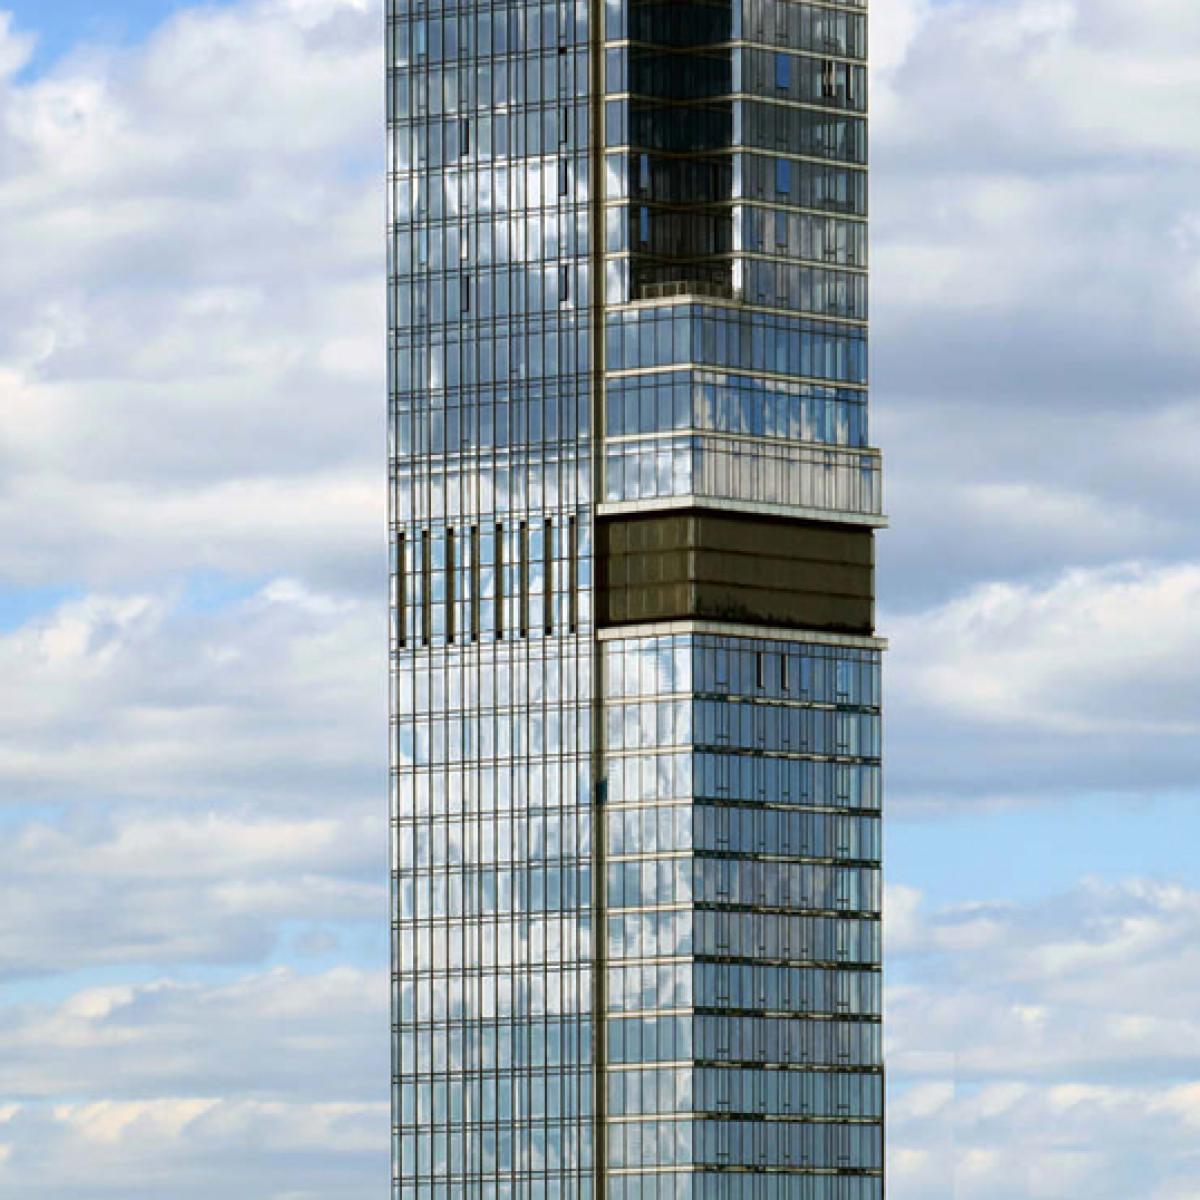 Nordstrom department store opens in world's tallest residential